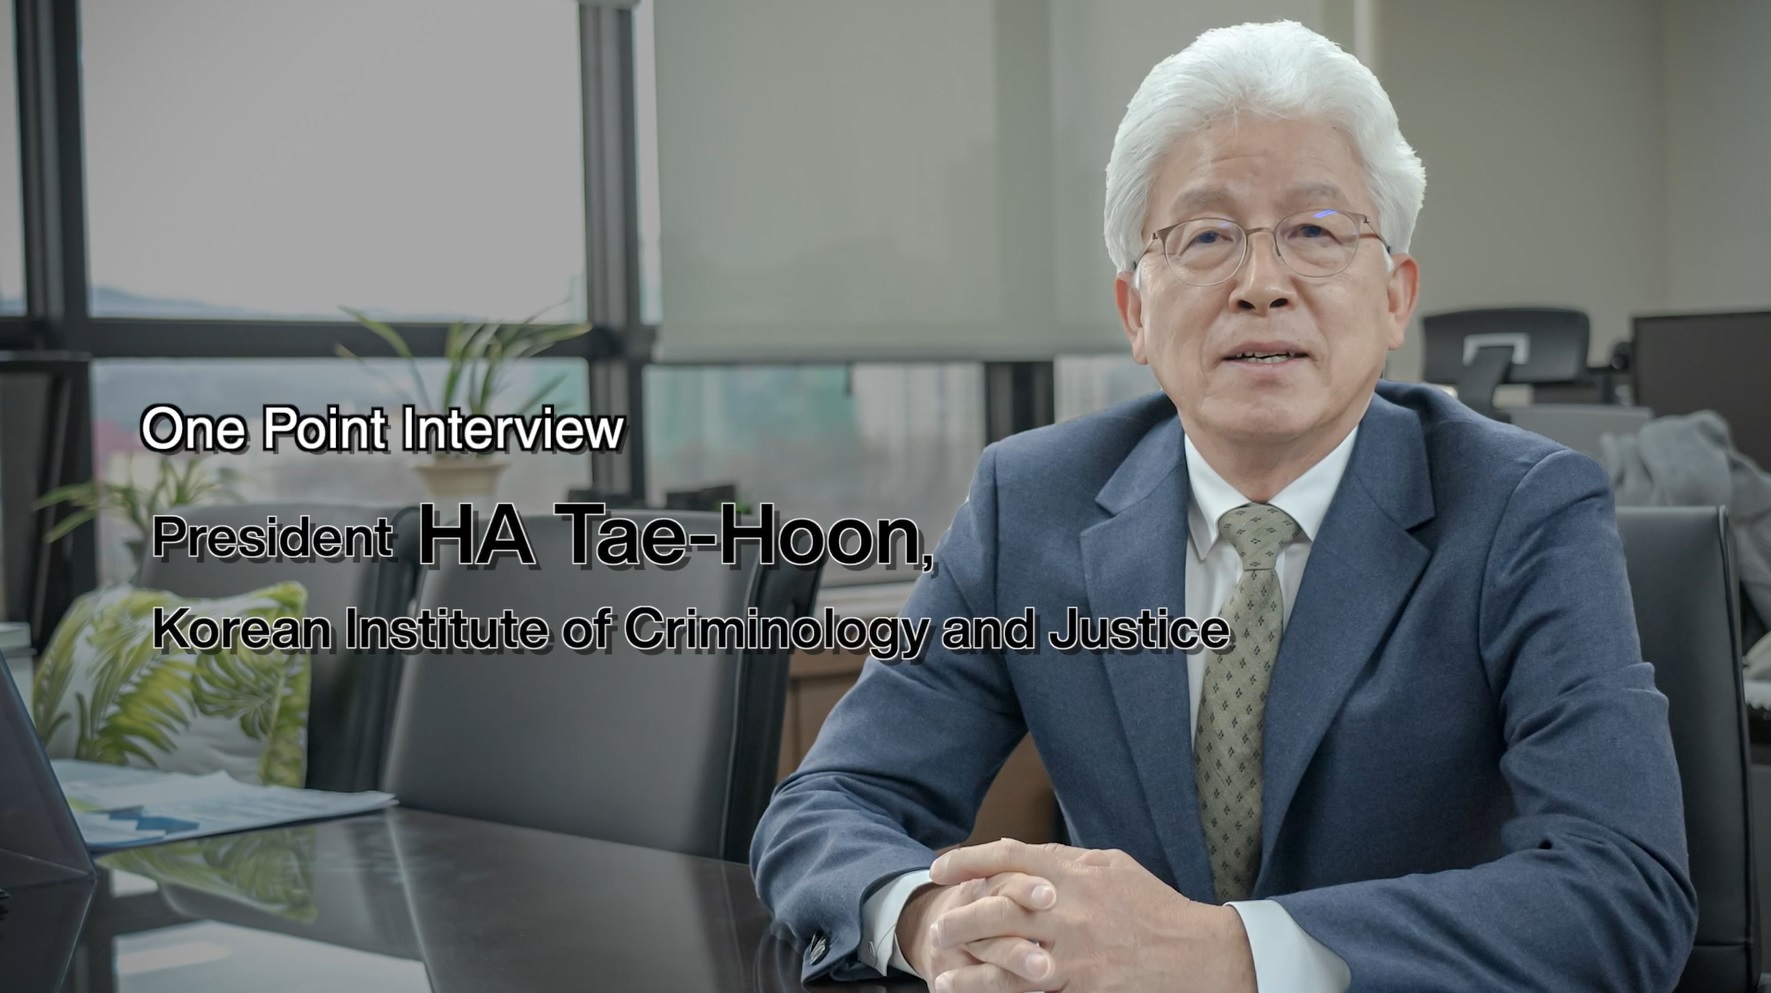 One Point Interview: President HA Tae-Hoon